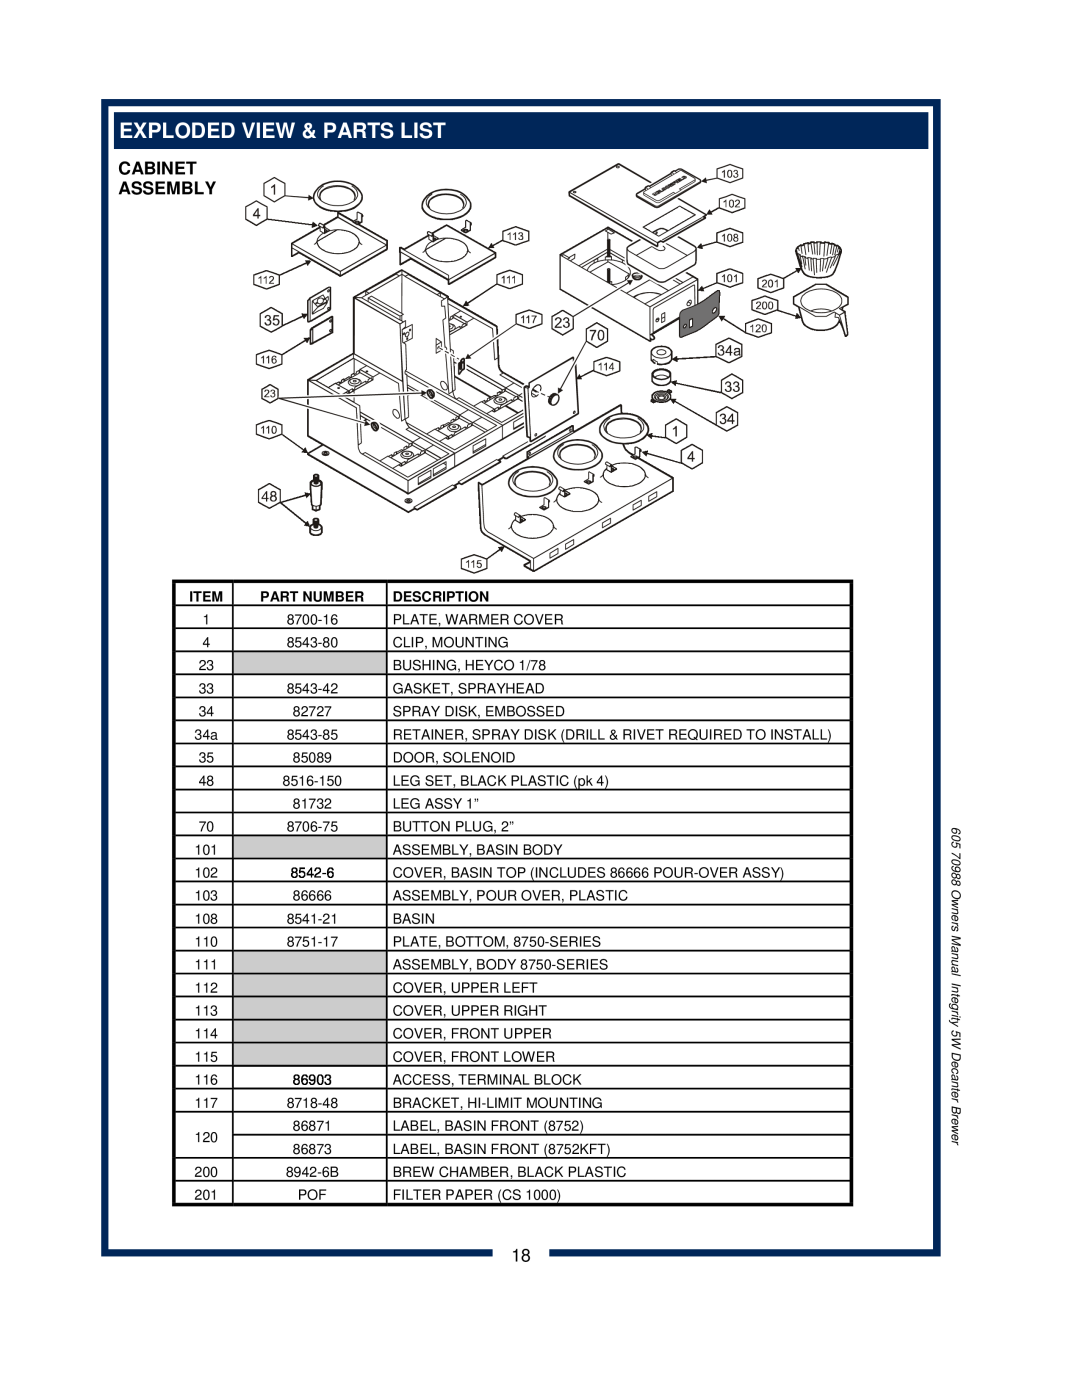 Bloomfield 8752 owner manual Exploded View & Parts List, Cabinet Assembly, Part Number, Description 